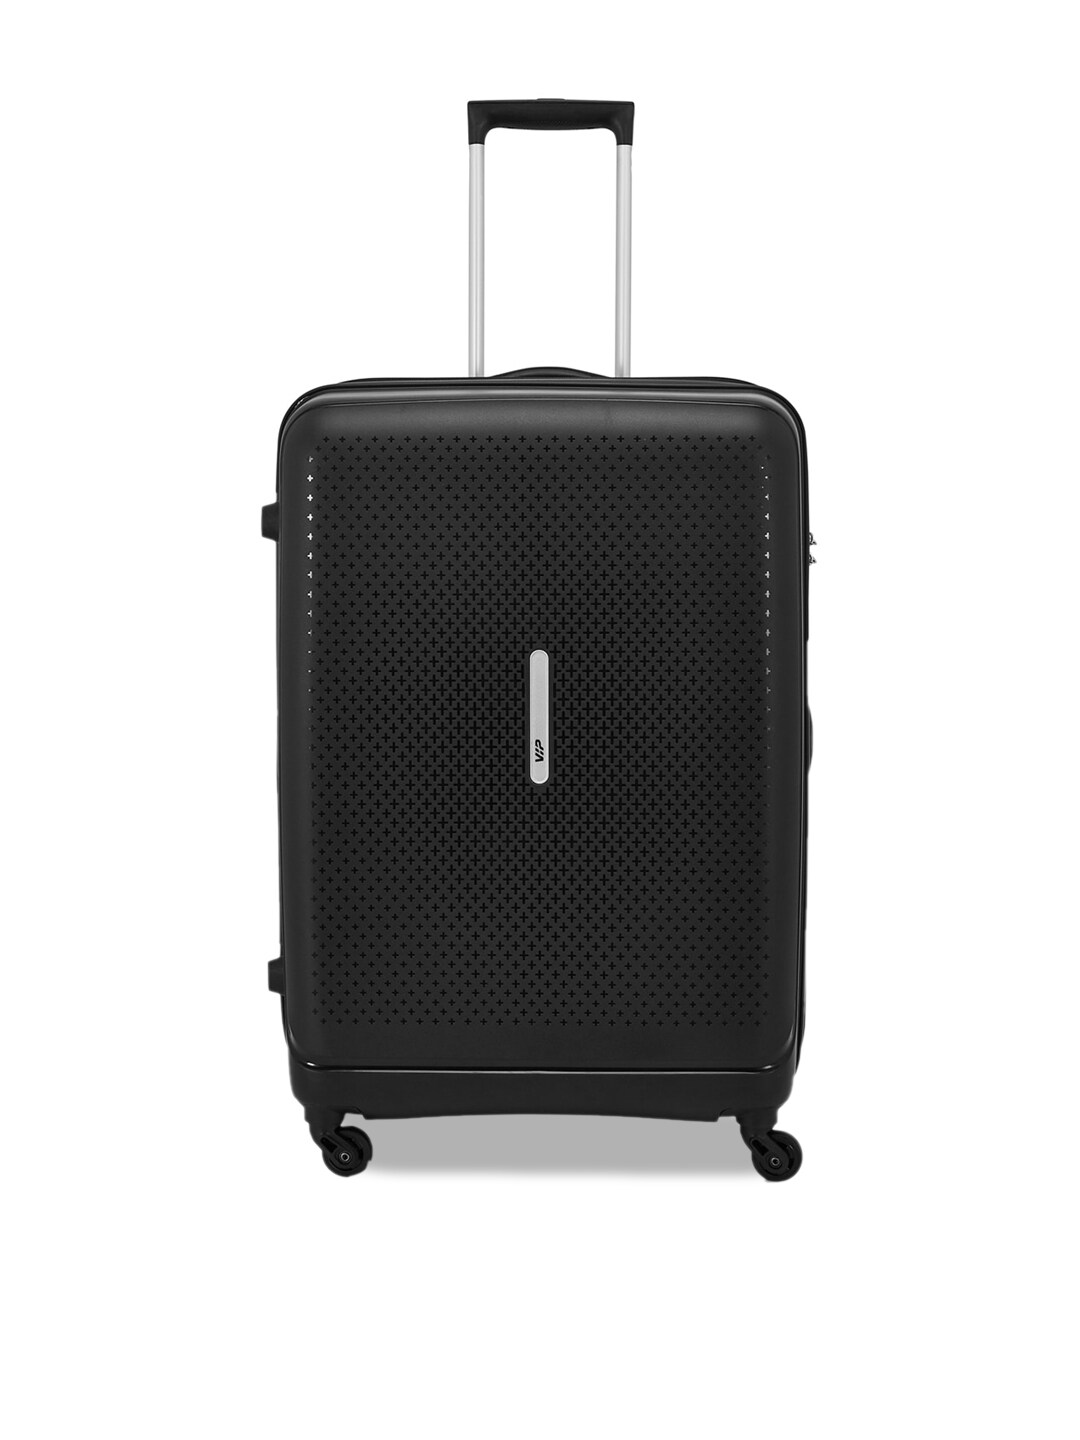 VIP Textured Hard-Sided Large Trolley Suitcase